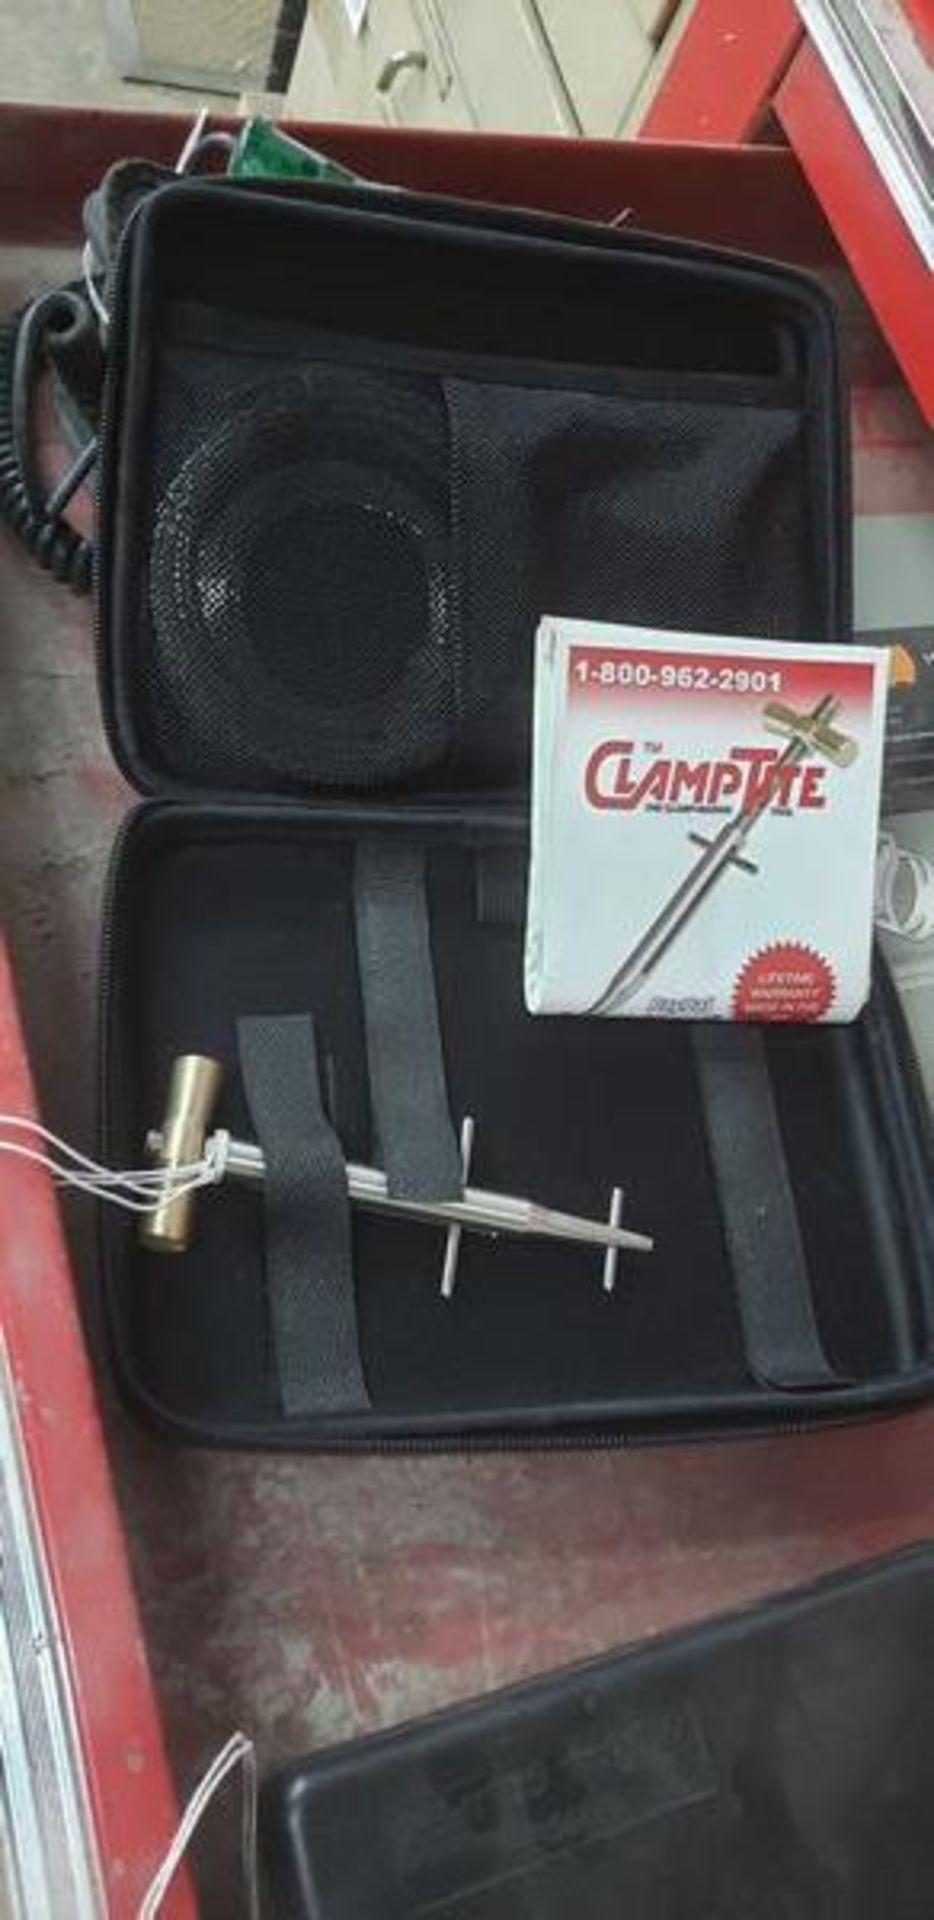 CLAMP TITE CLMP MAKING TOOL WITH CASE